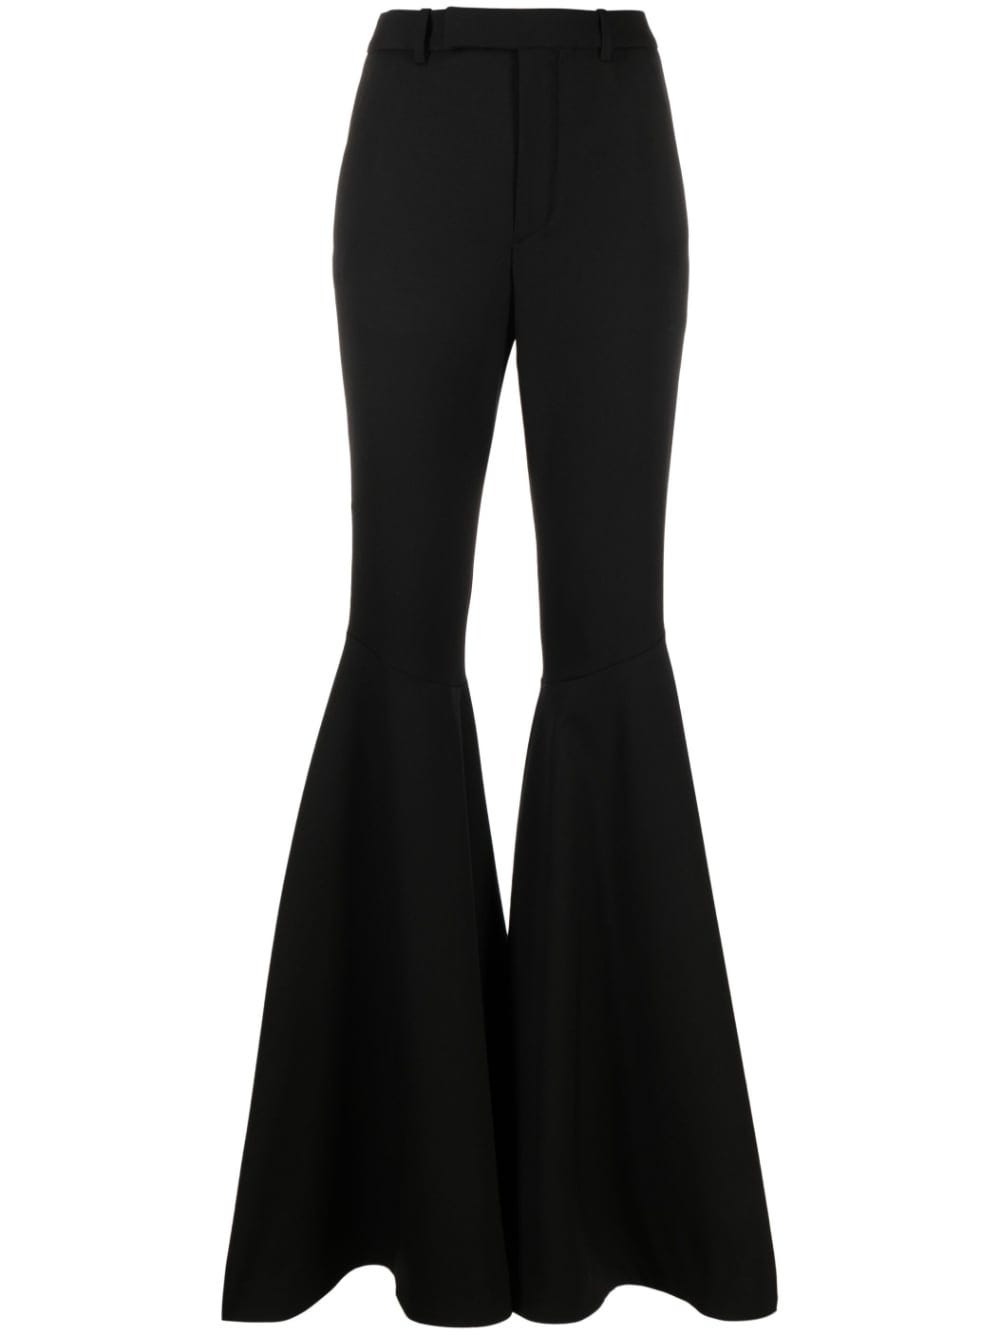 SAINT LAURENT HIGH-WAISTED FLARED TROUSERS